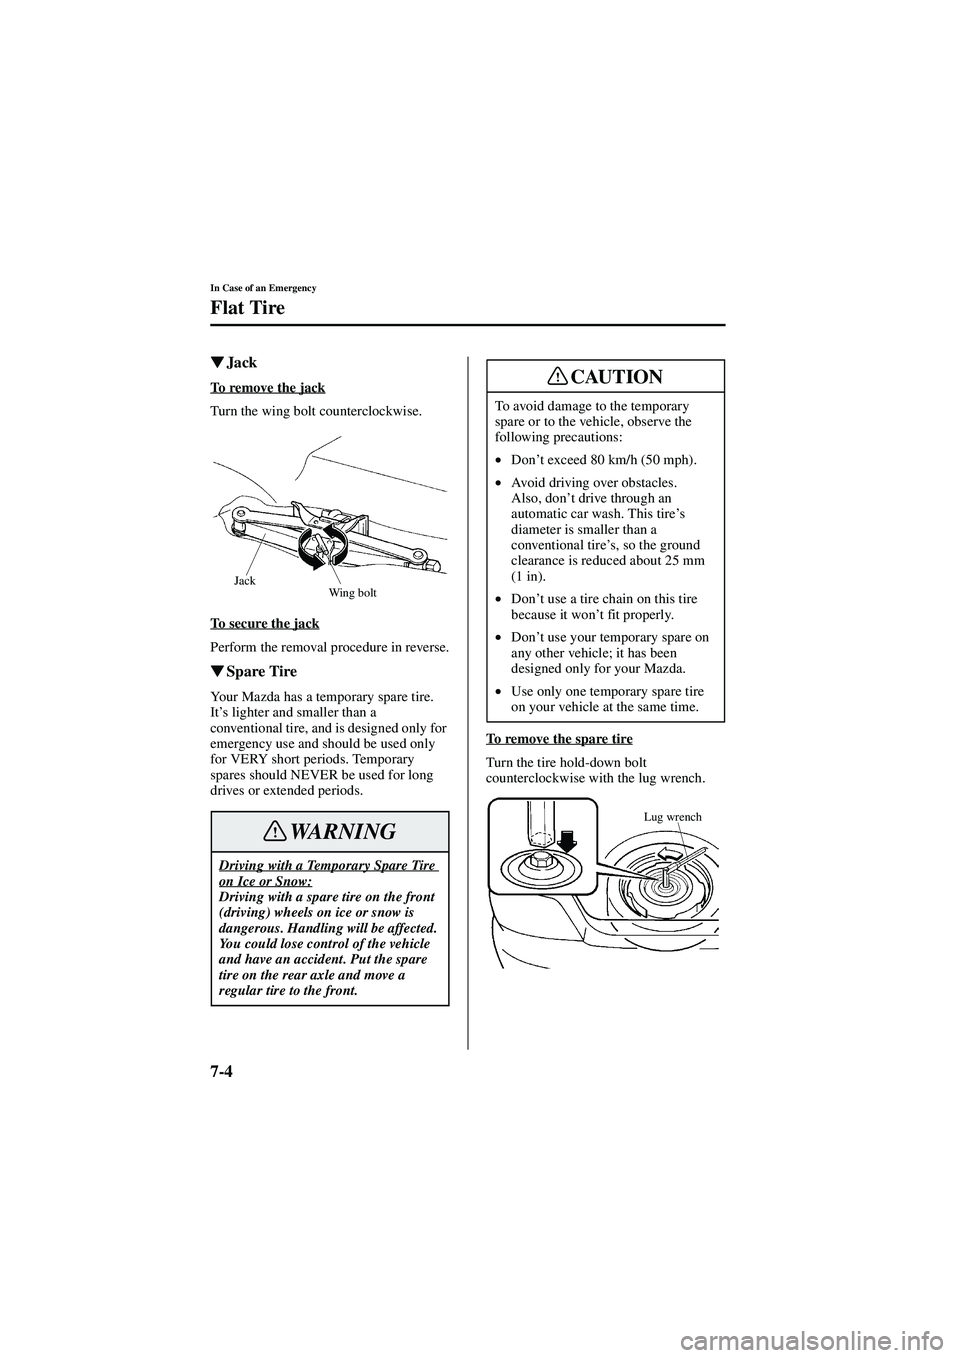 MAZDA MODEL 626 2002  Owners Manual 7-4
In Case of an Emergency
Flat Tire
Form No. 8Q50-EA-01G

  Jack
To remove the jack
Turn the wing bolt counterclockwise.
To secure the jack
Perform the removal procedure in reverse.

  Spare